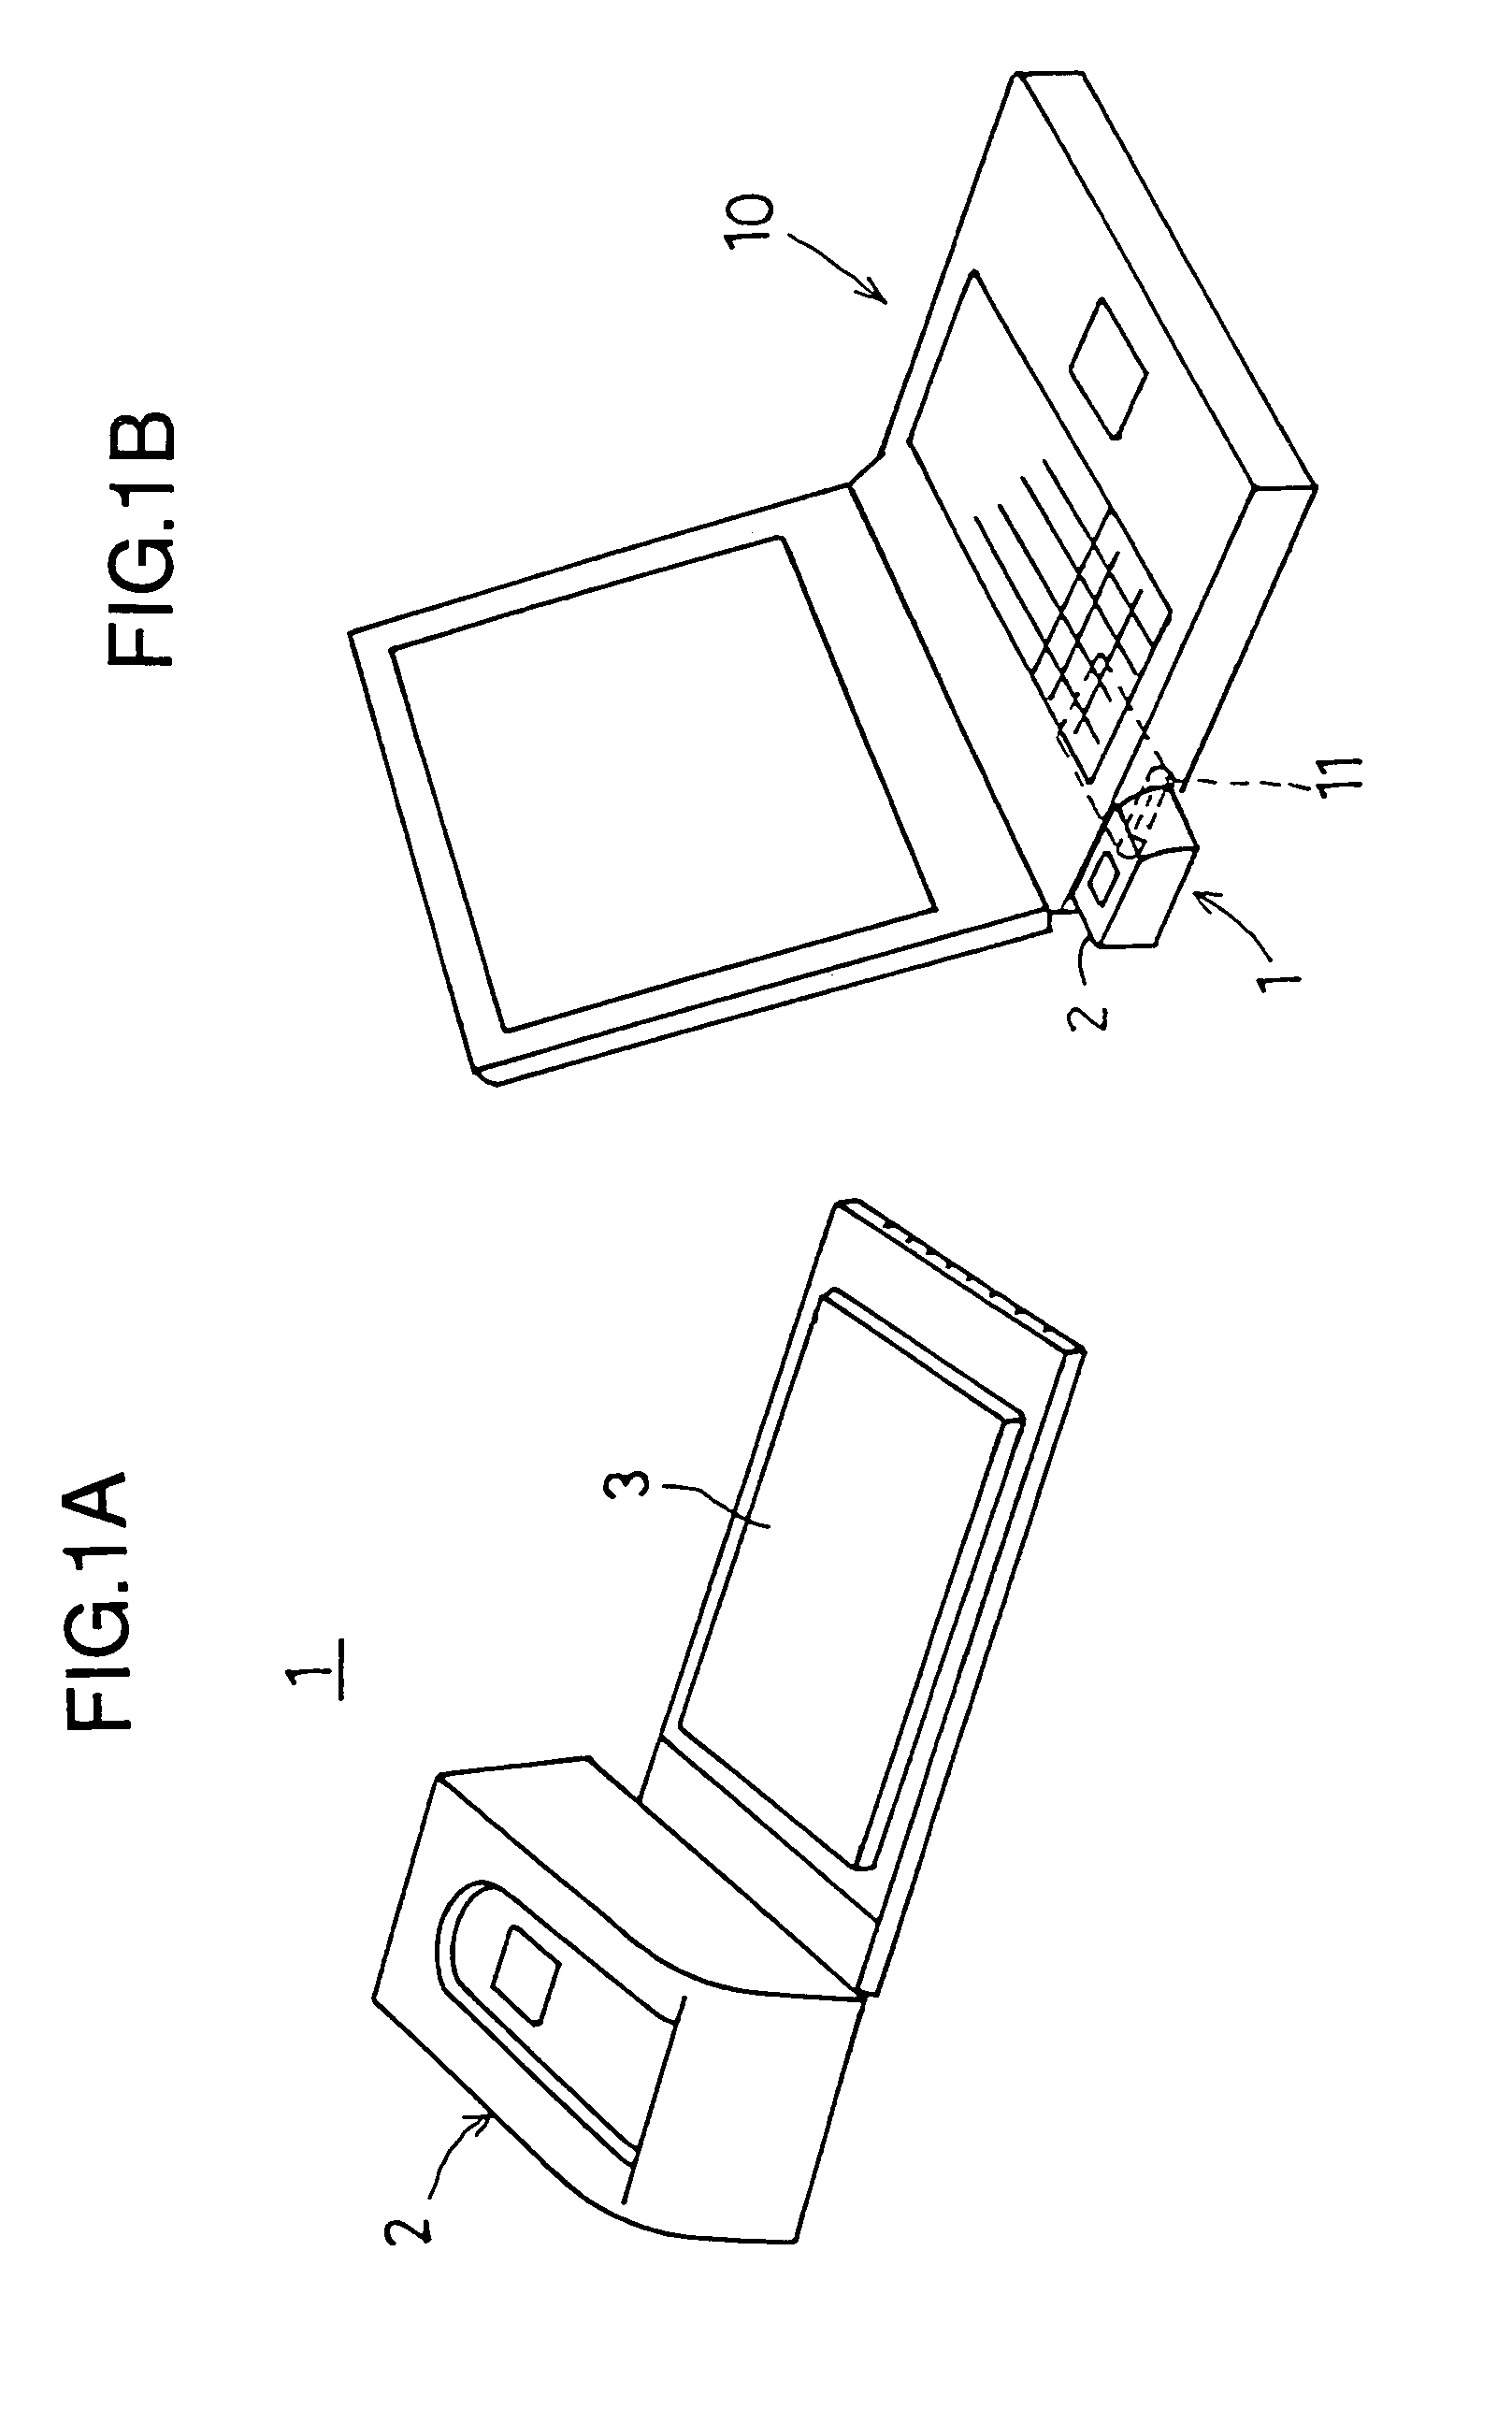 Extension device providing security function